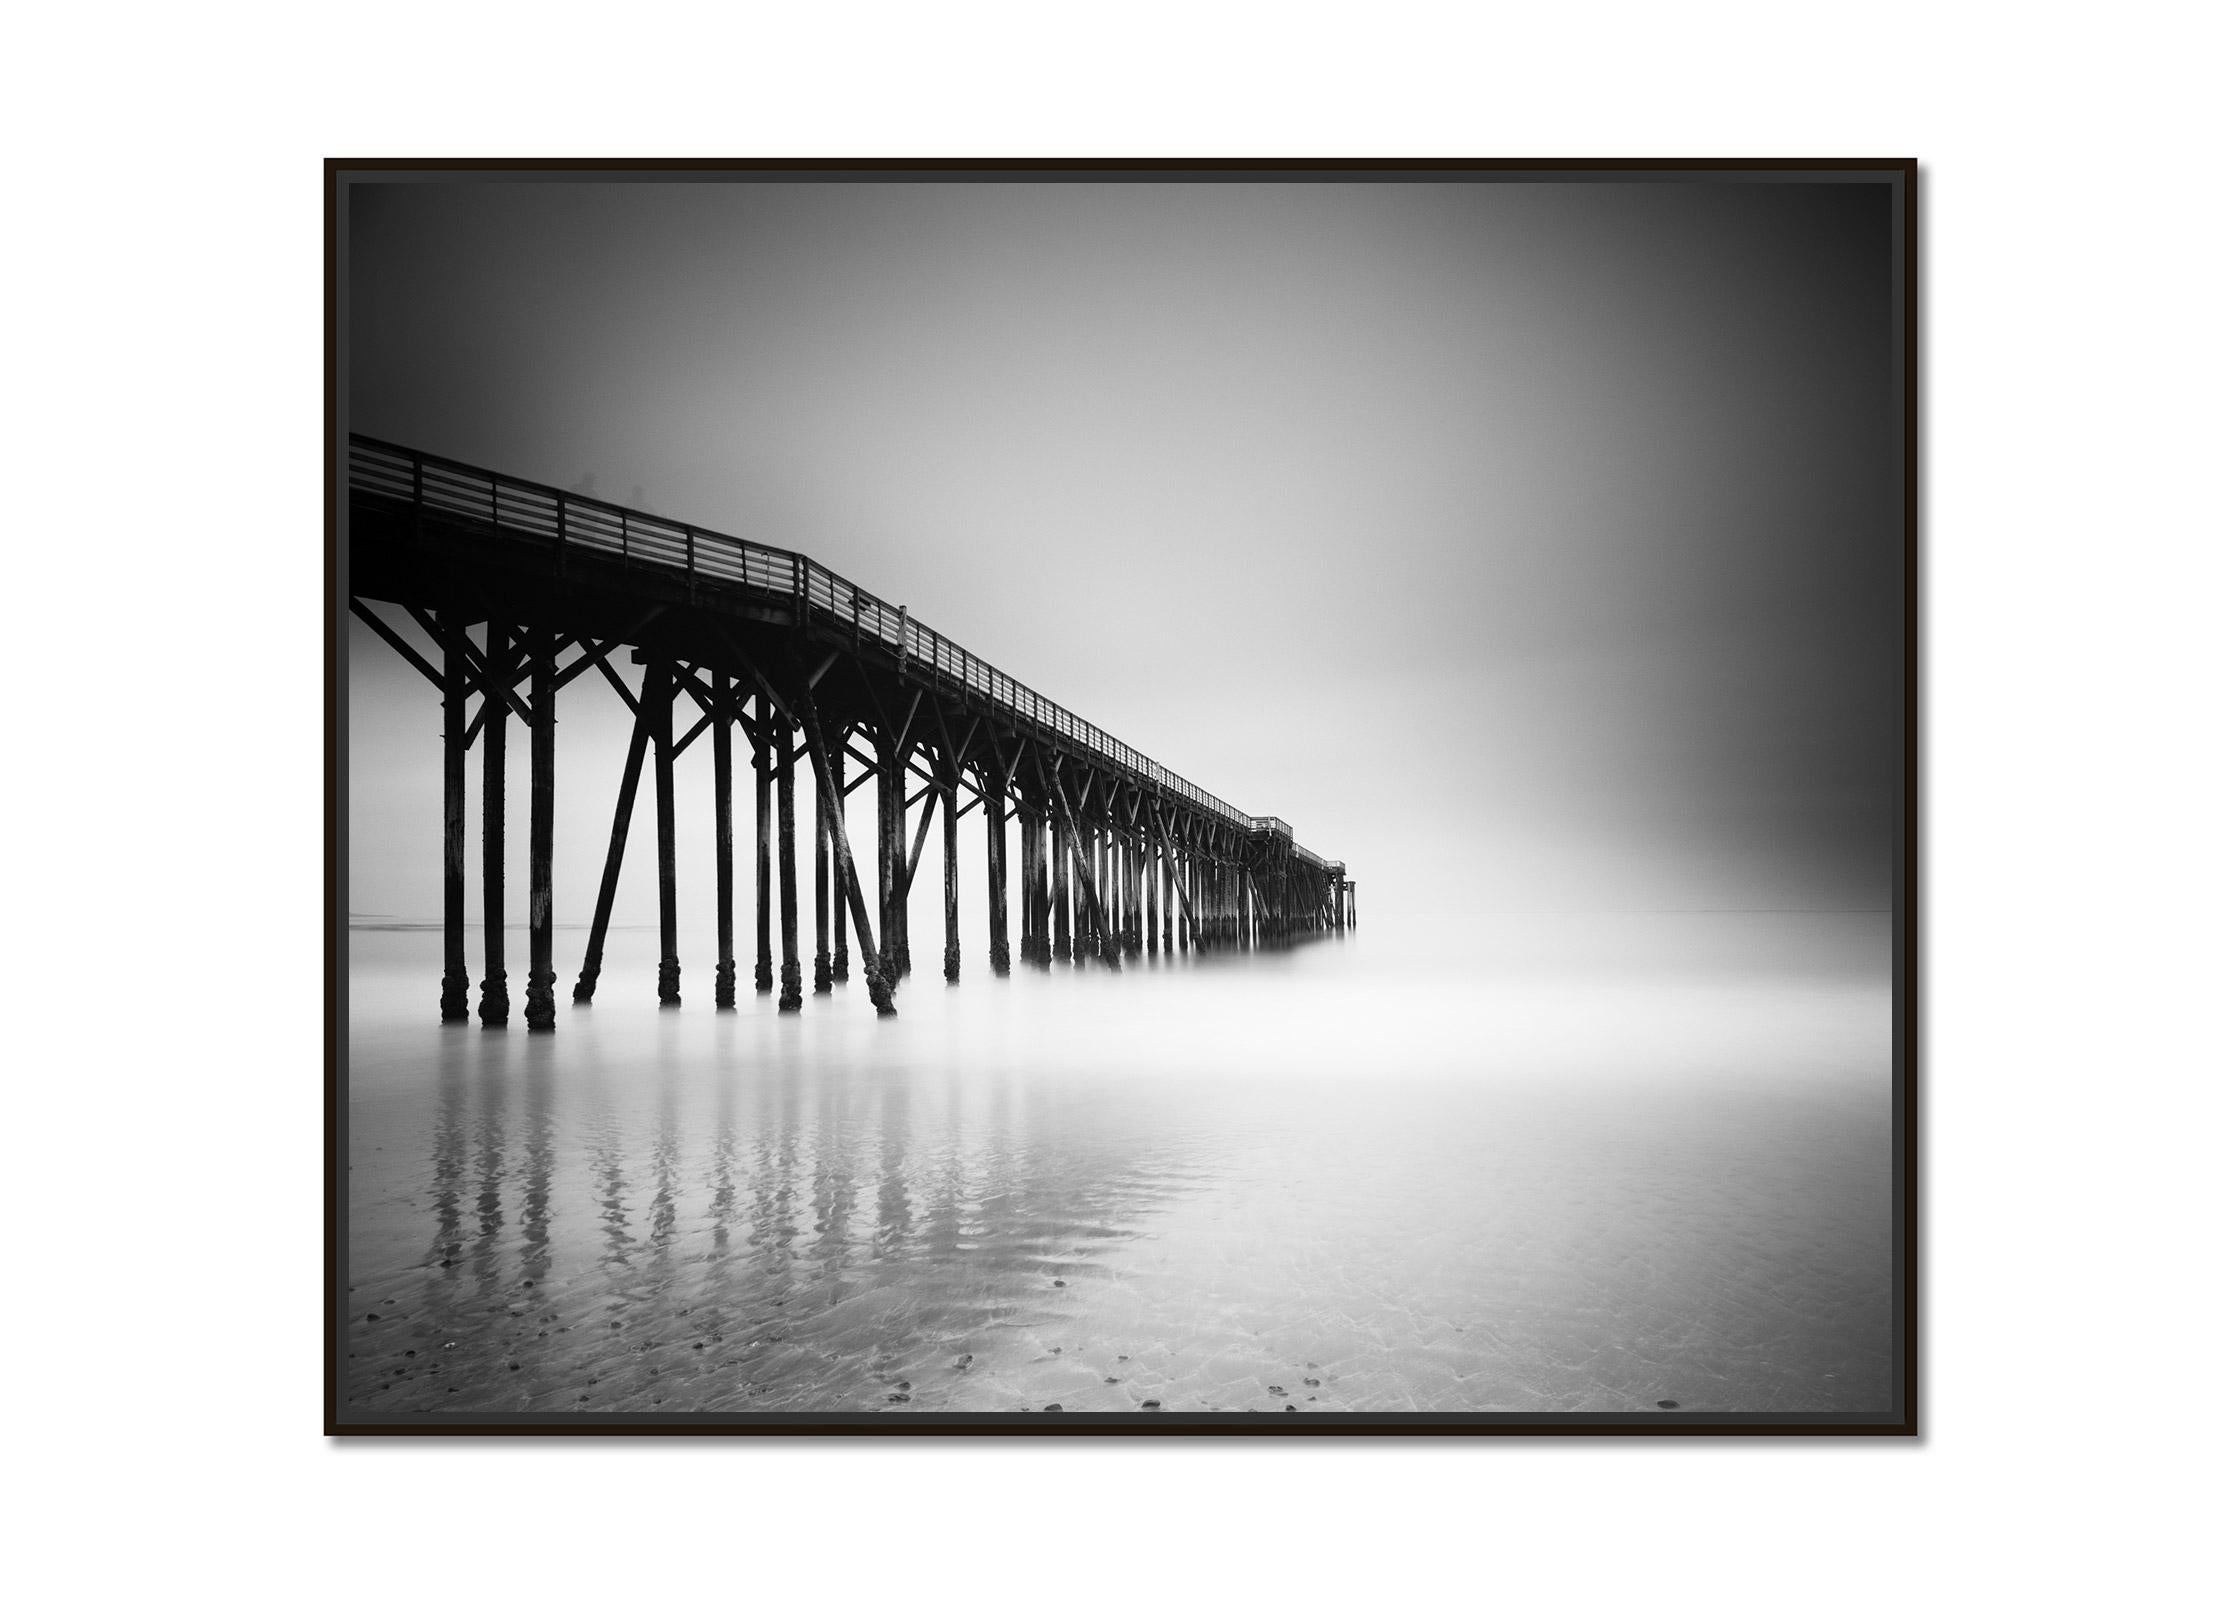 Black Pier, Beach, California, USA, black and white long exposure photography - Photograph by Gerald Berghammer